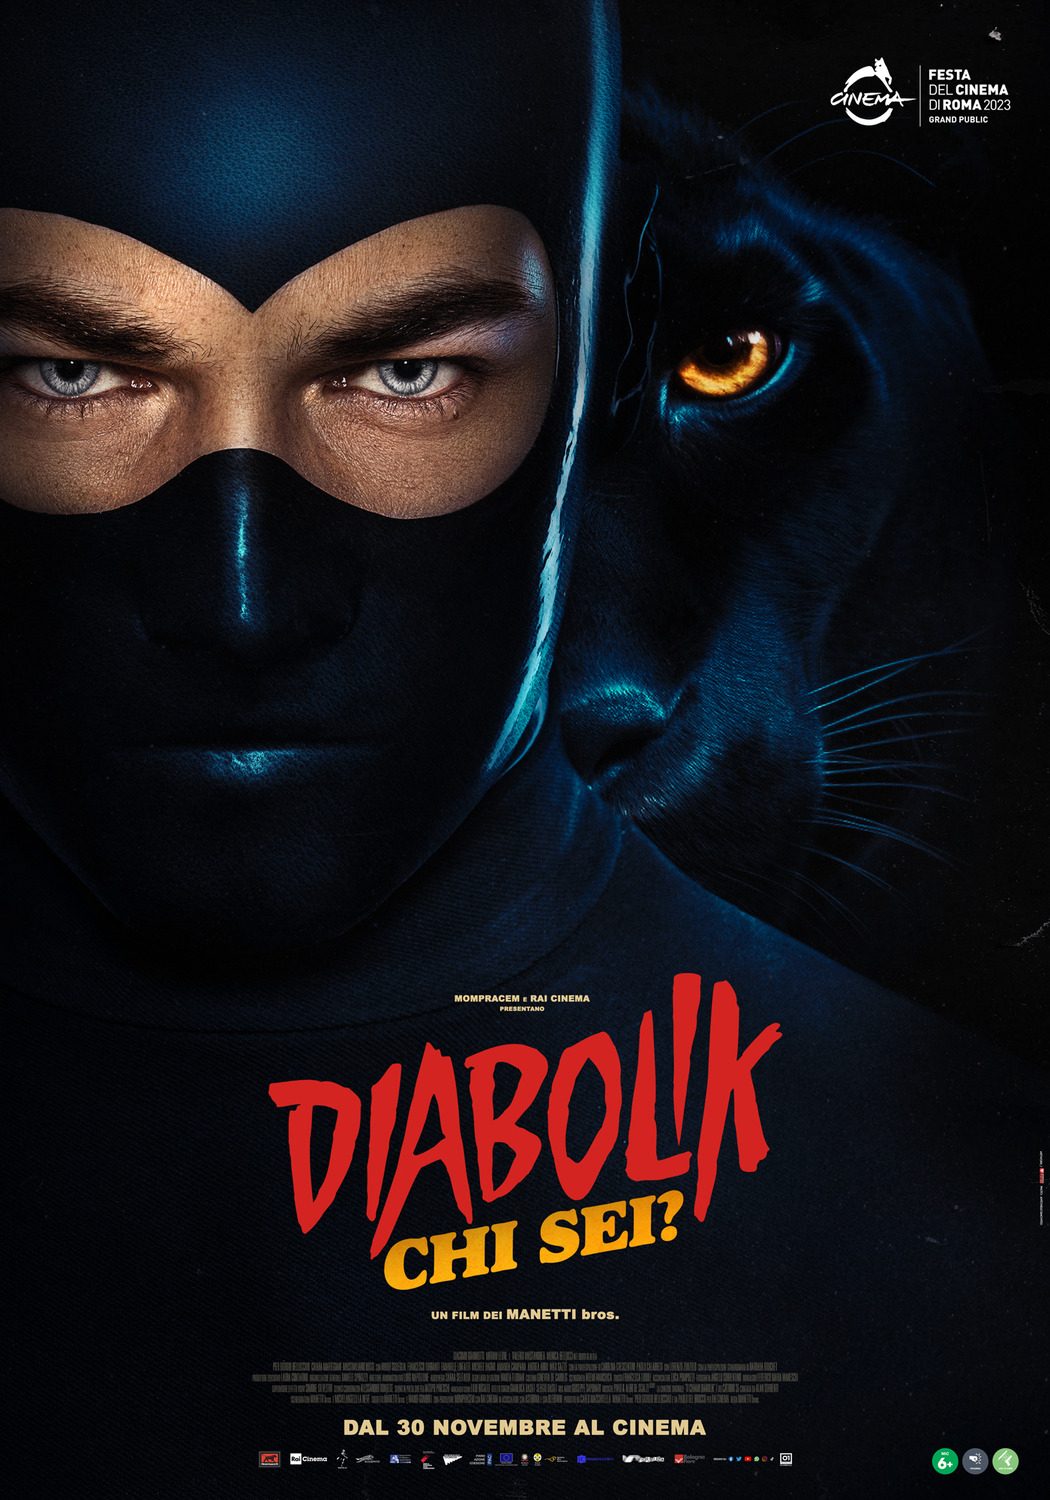 Extra Large Movie Poster Image for Diabolik chi sei? (#2 of 6)